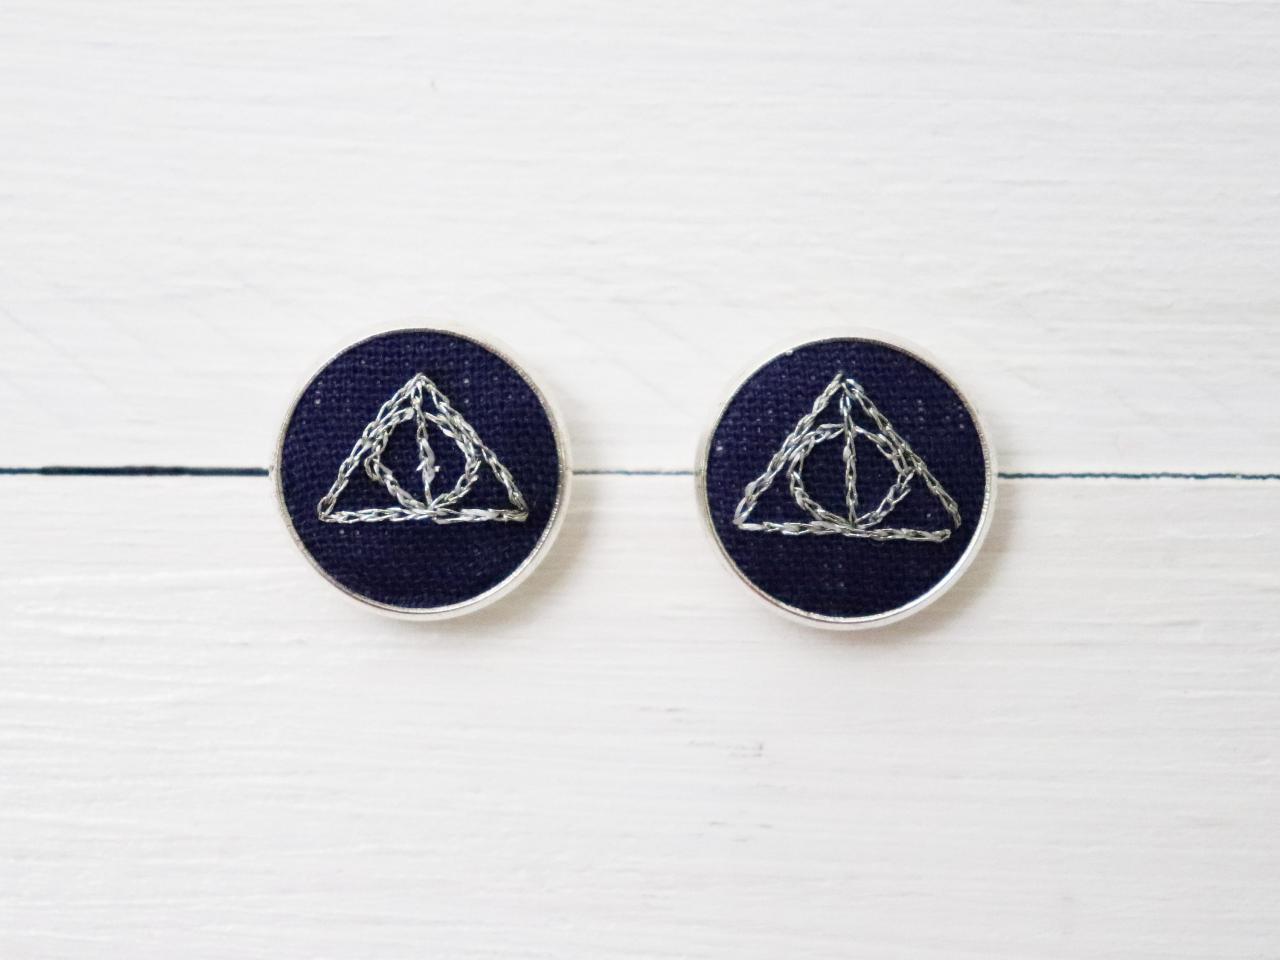 Set Of 2 Miniature Embroidery Pin Embroidered Brooch Embroidered Pin Embroidery Pin Hand Embroidered Pin Embroidered Collar Pin